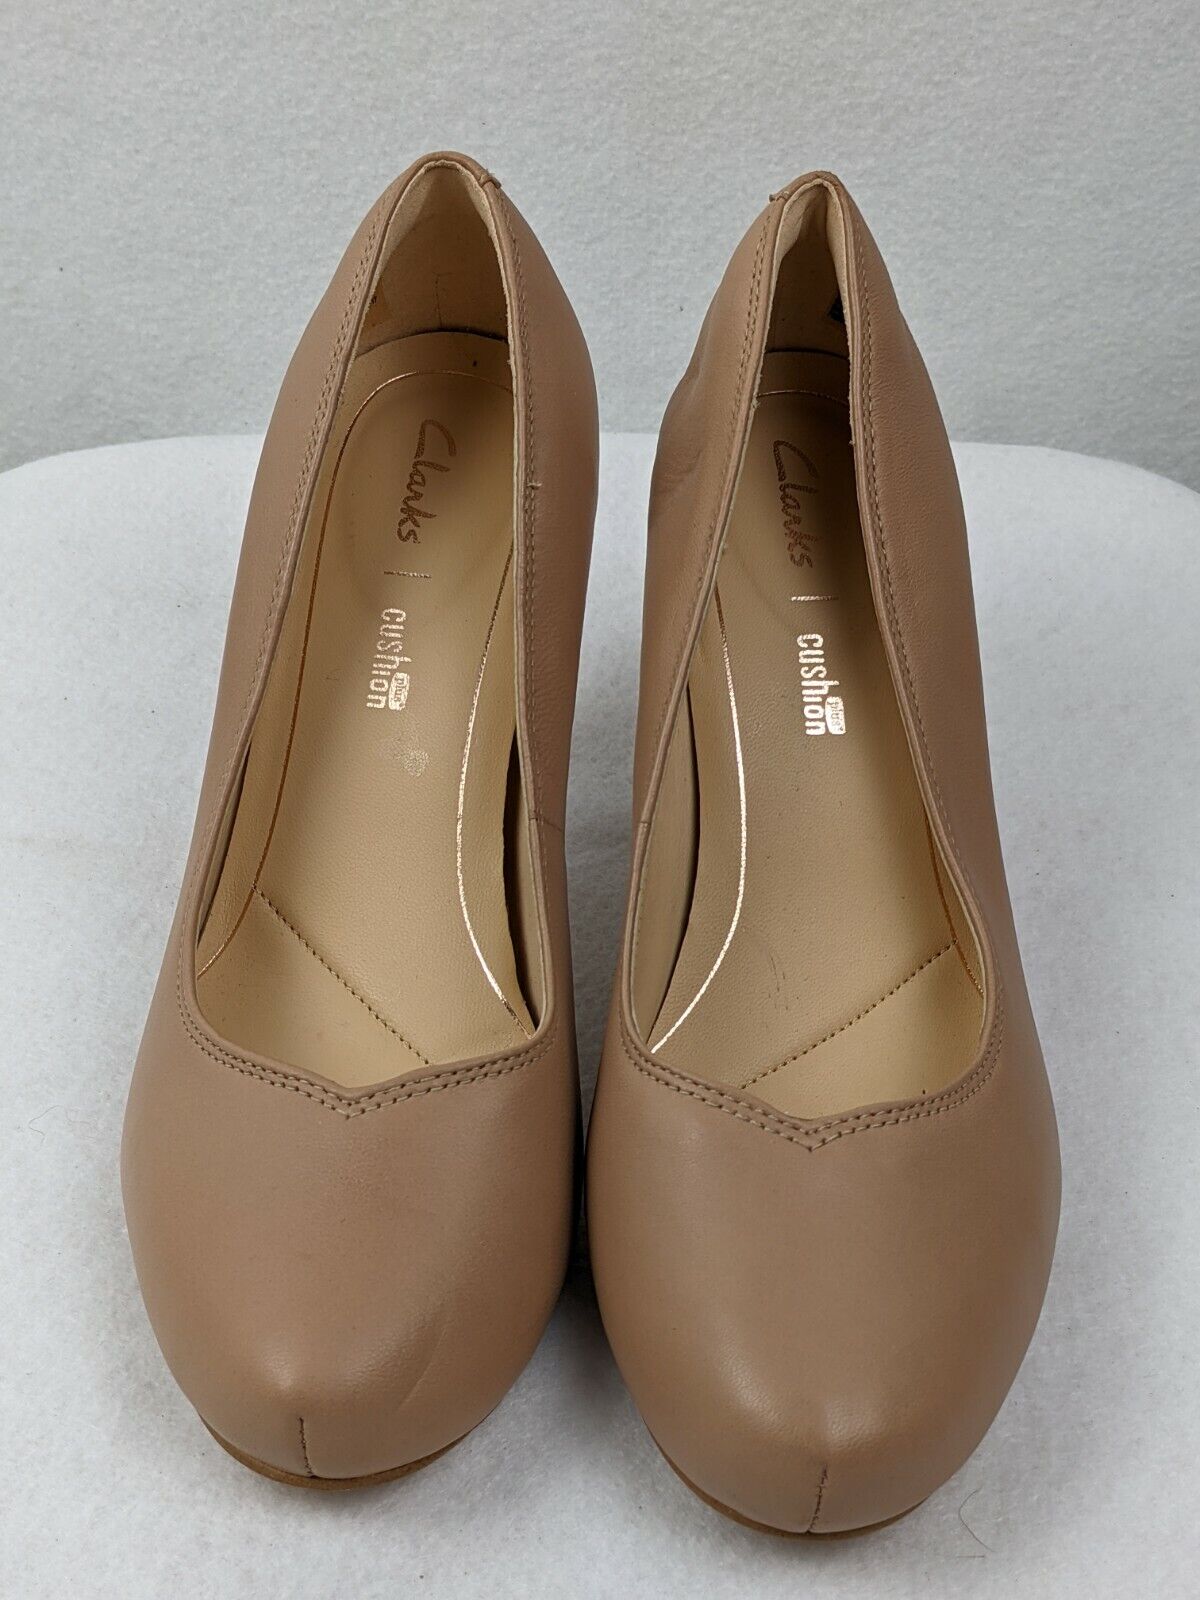 Clarks Women#039;s nude leather cuir size heel Ranking TOP2 daily Max 52% OFF ecru rose